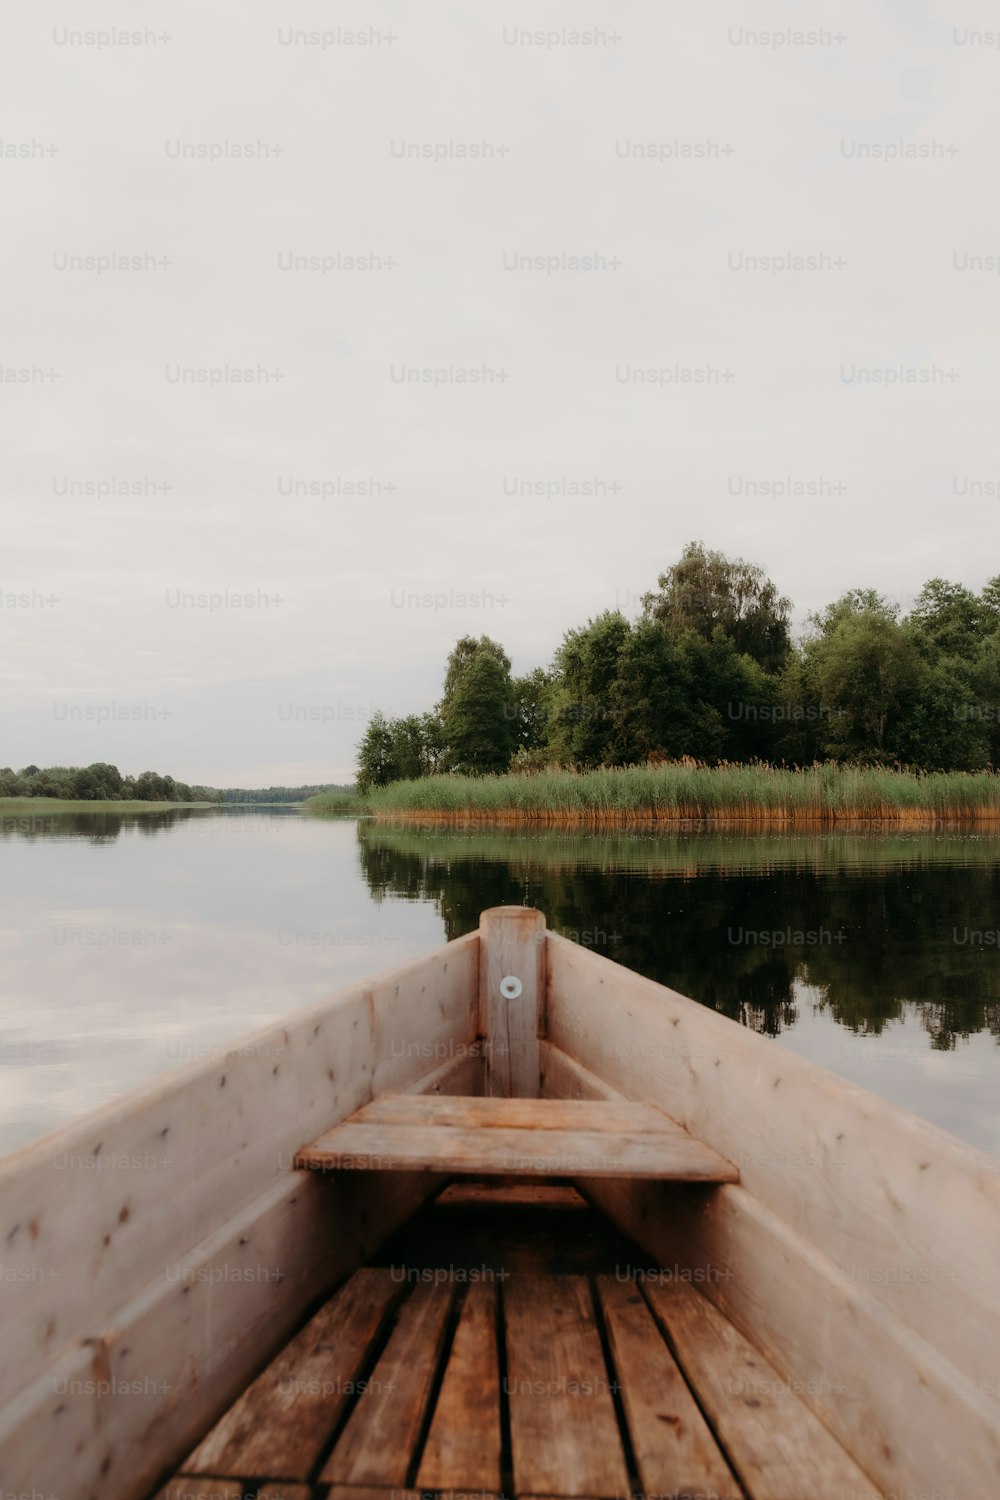 A small boat floating on top of a body of water photo – Wooden